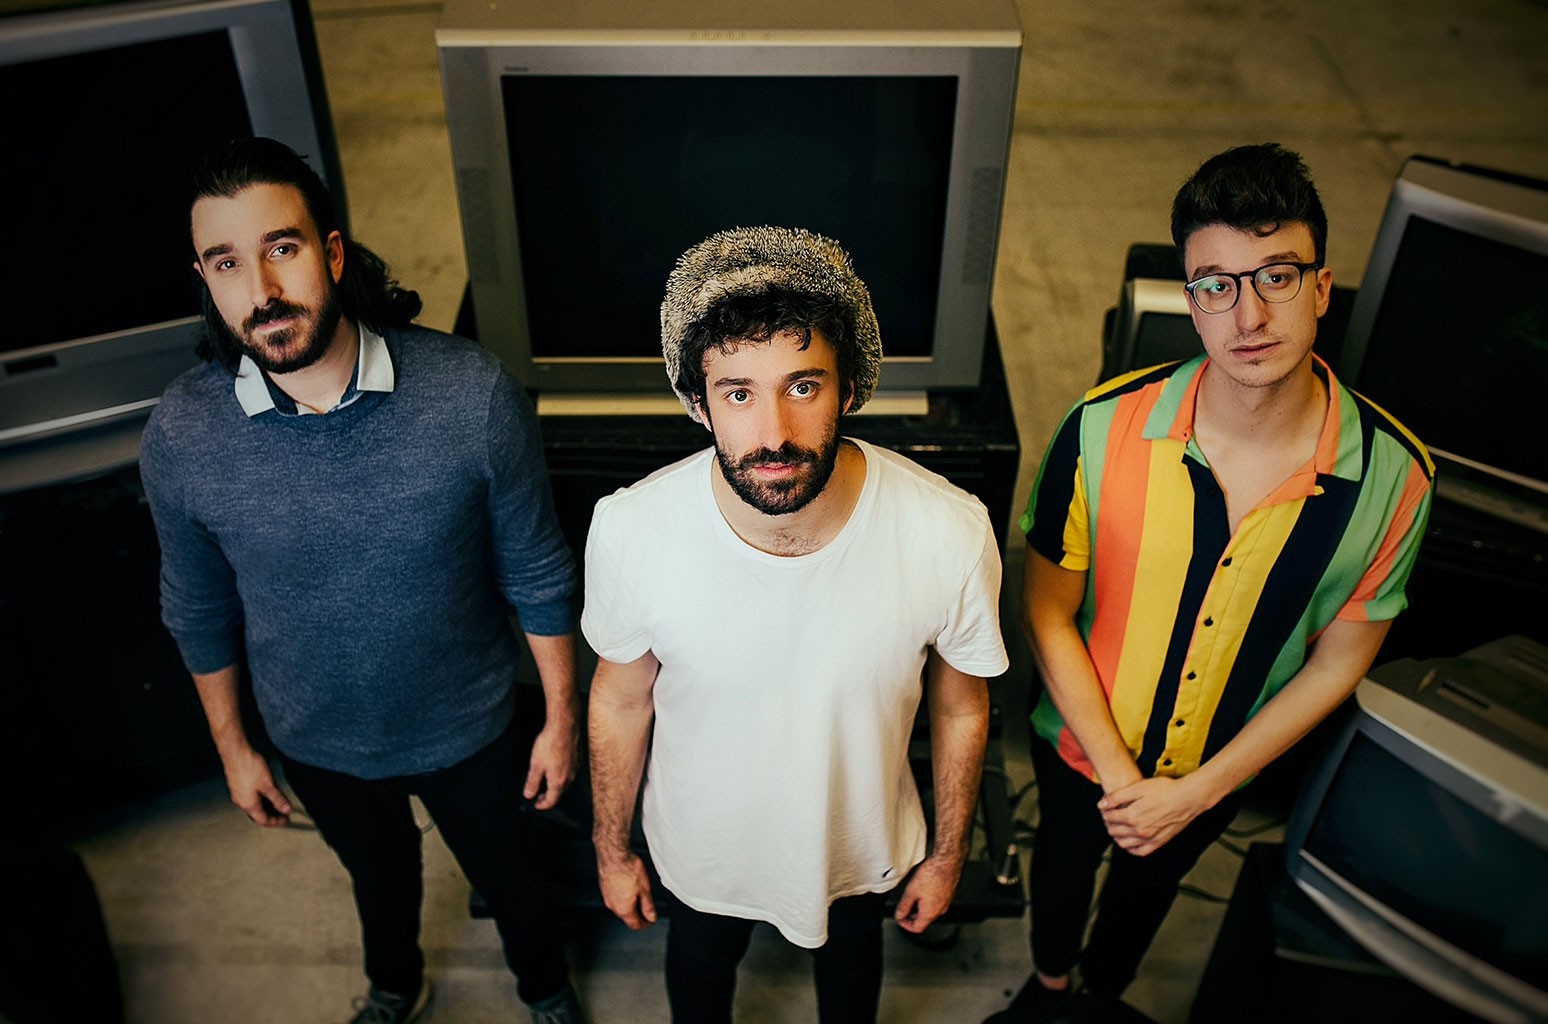 AJR and Glass Animals to Perform at 2021 Billboard Music Awards